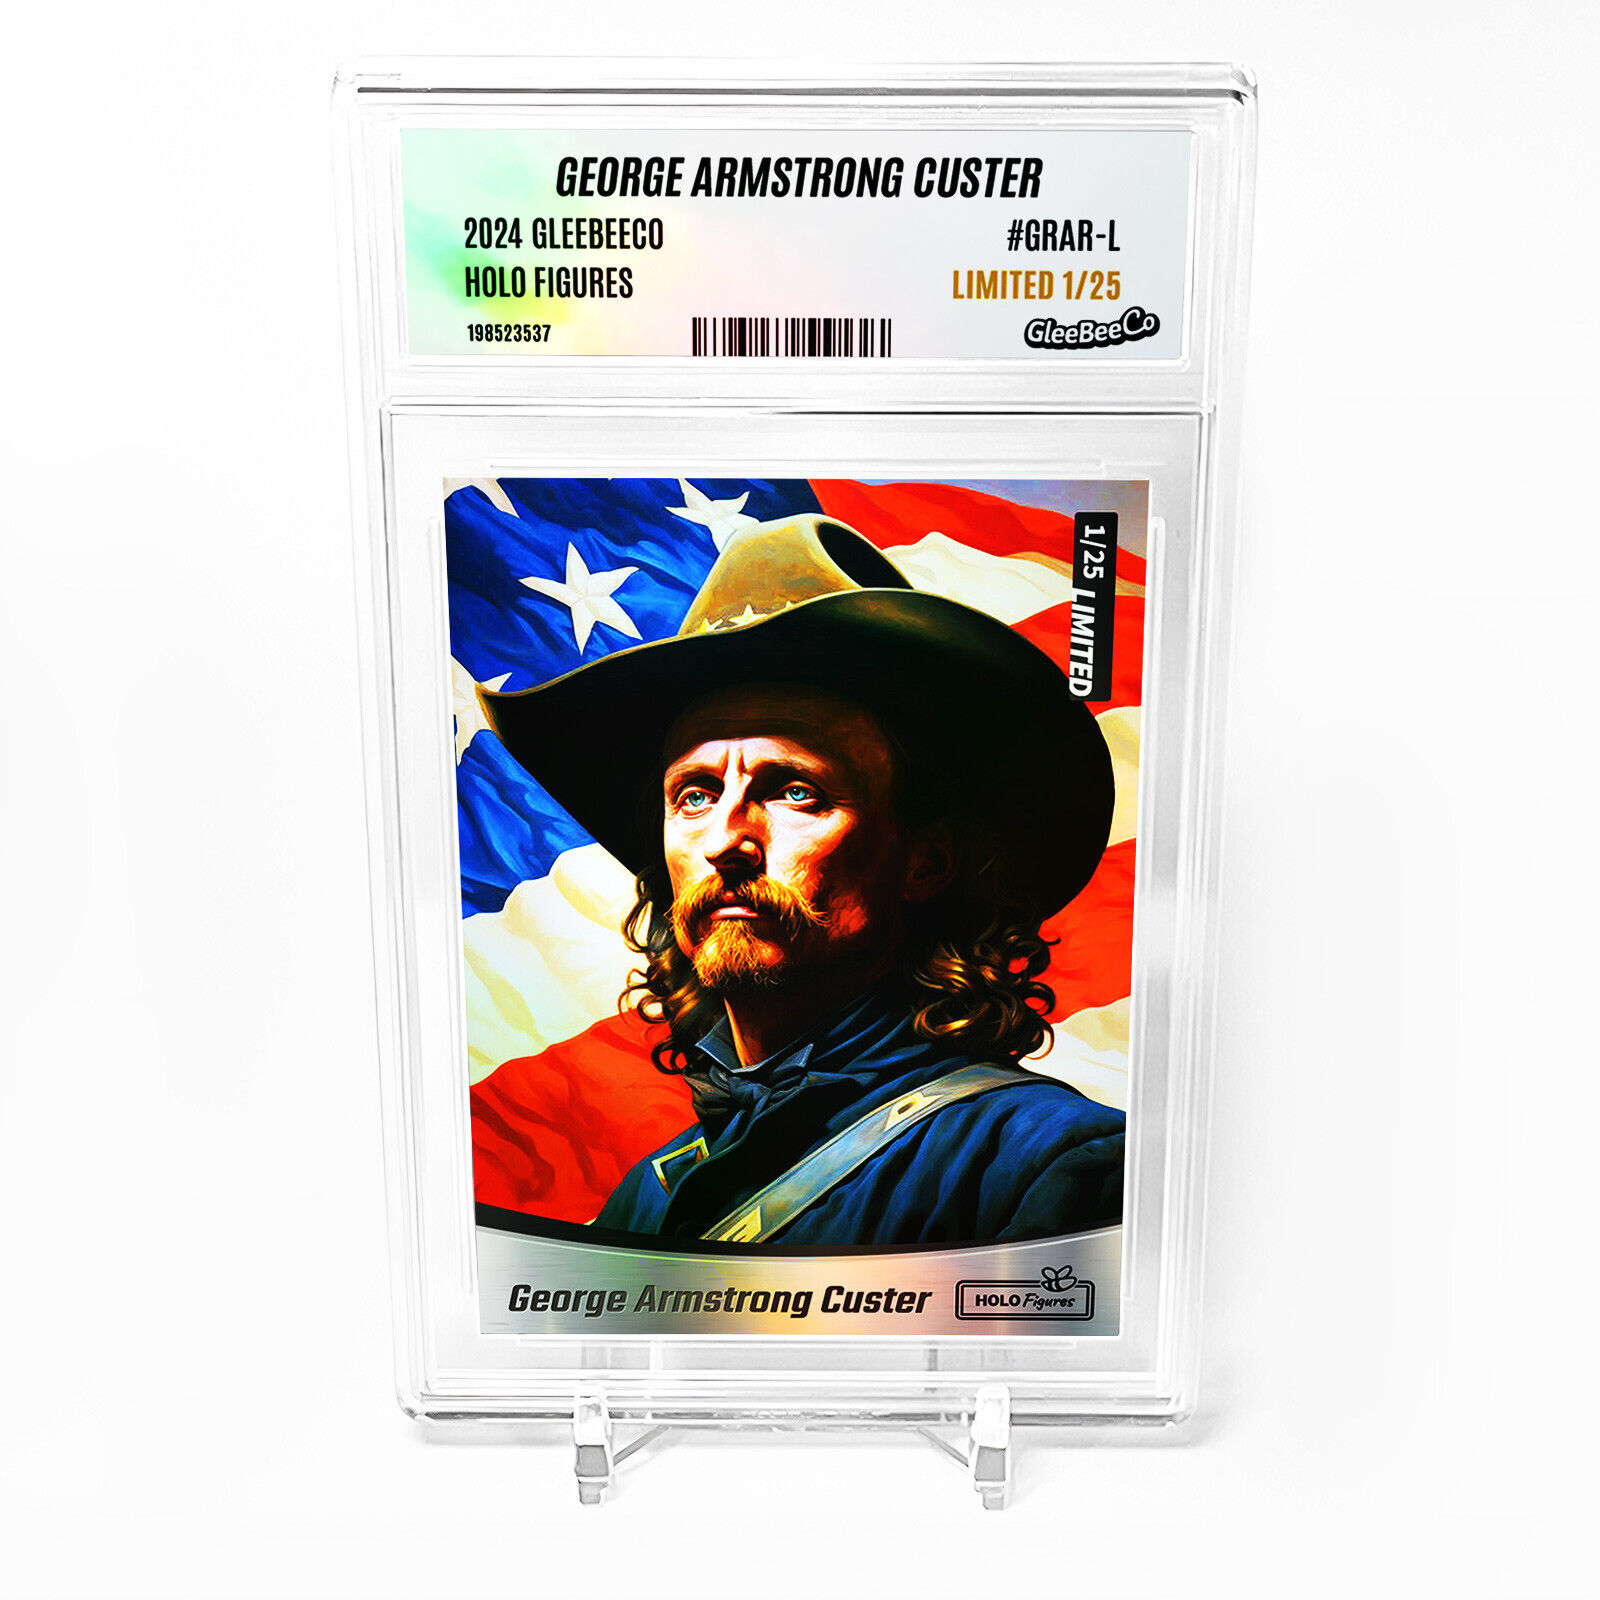 GEORGE ARMSTRONG CUSTER America Card 2024 GleeBeeCo Holographic #GRAR-L /25